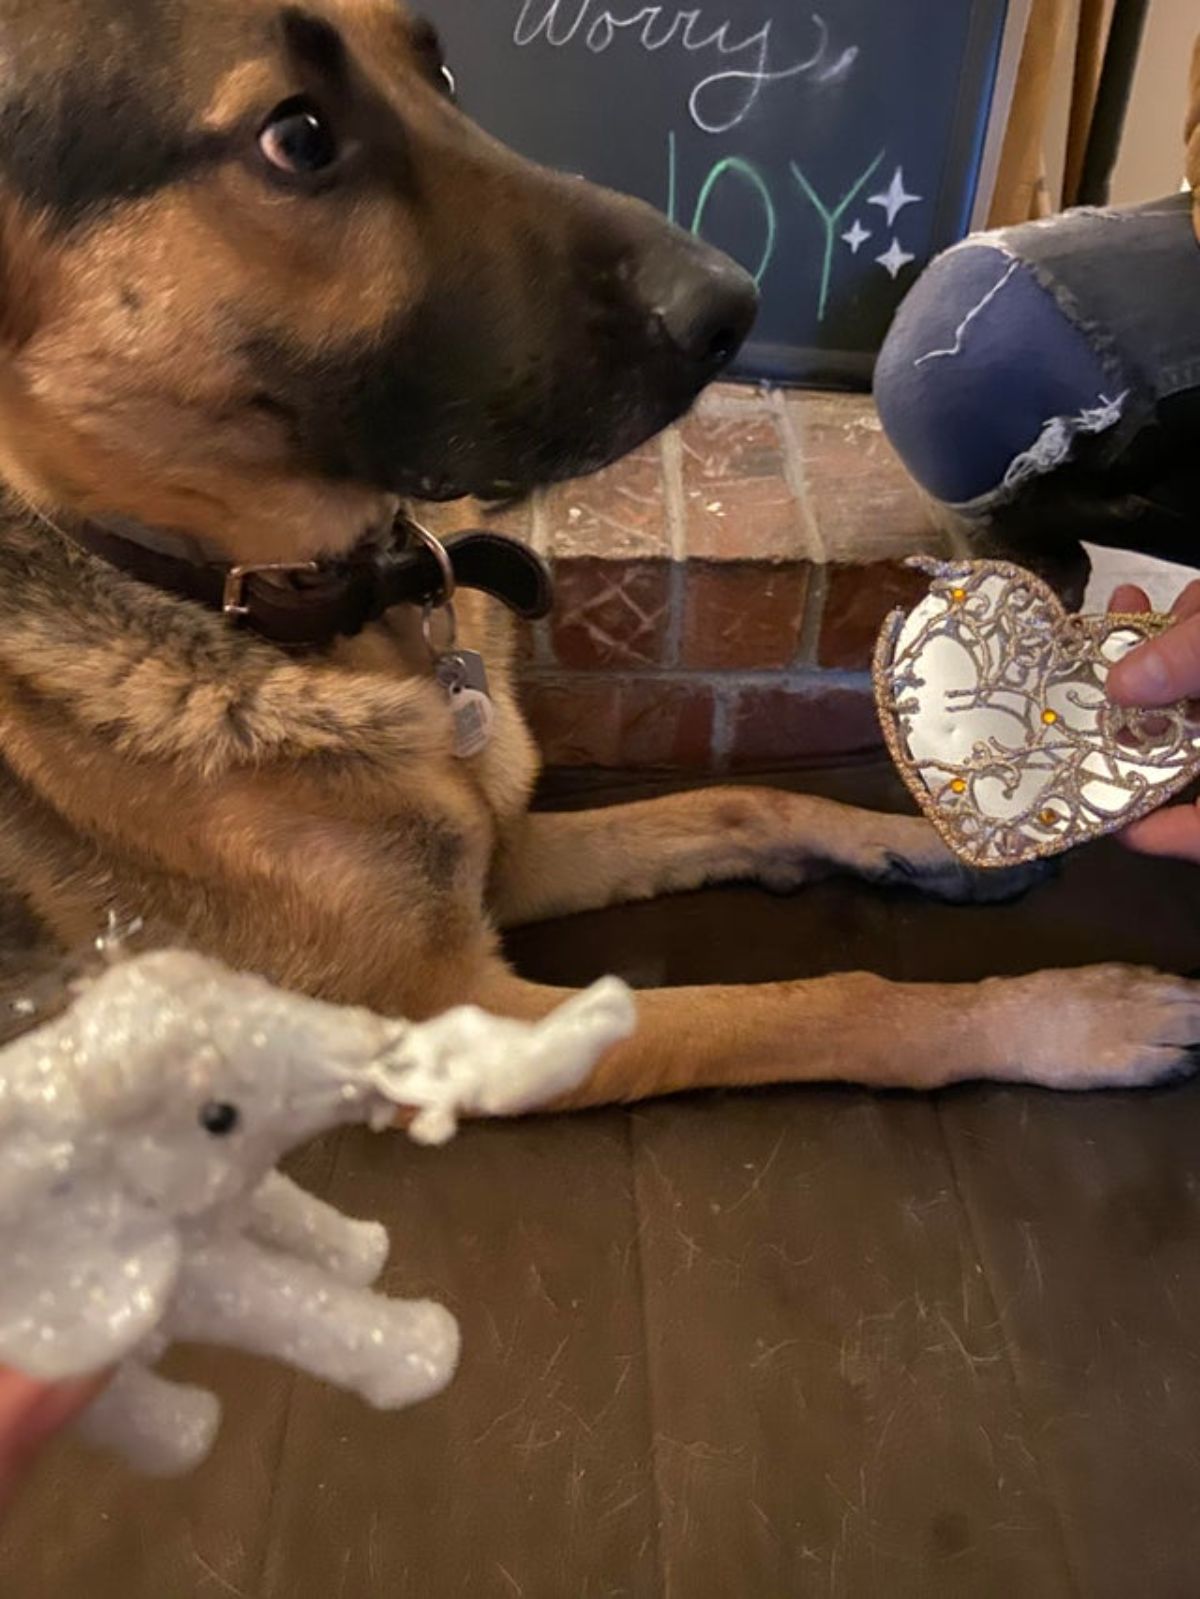 golden shepherd laying on the floor looking alarmed while someone holds out a silver heart ornament and silver elephant ornament in front of the dog